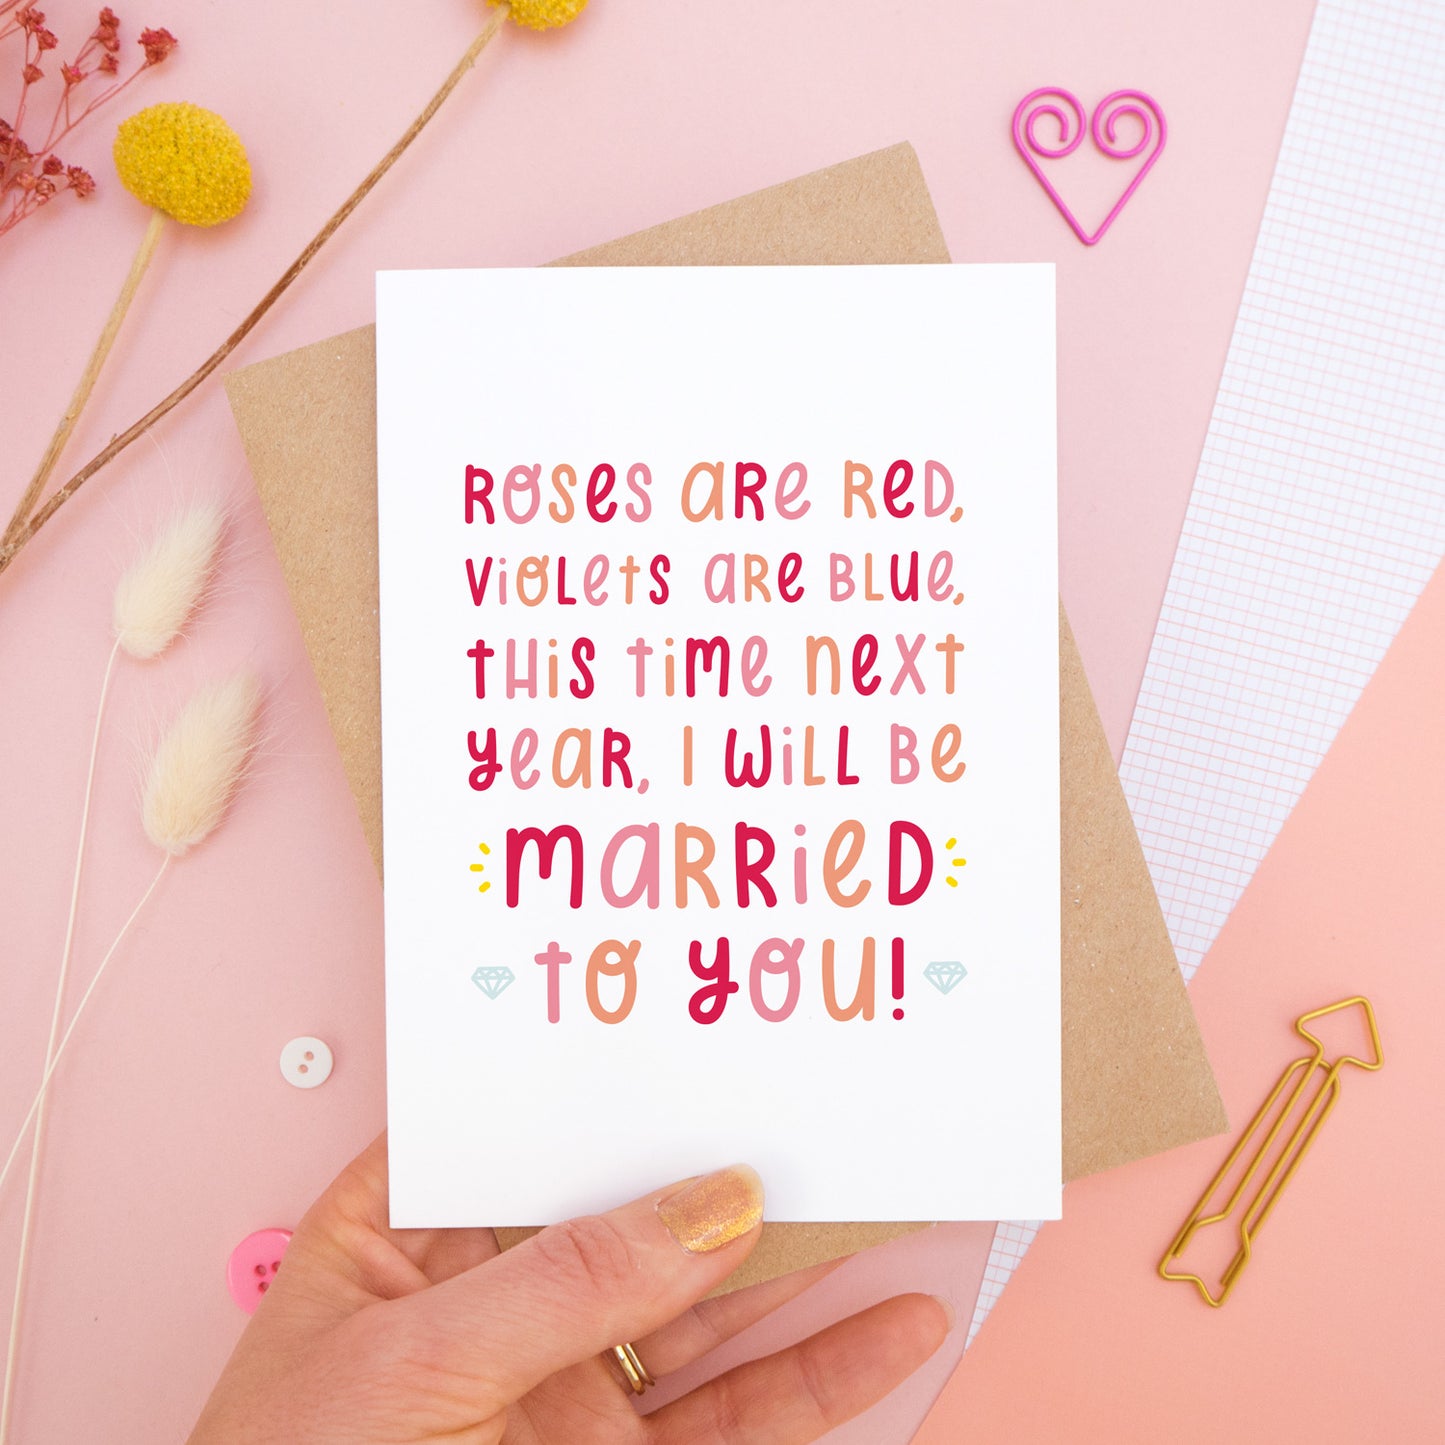 The 'this time next year' card photographed on a pink background with dried flowers, buttons and paper clips as props. The card itself is being held above the scene.